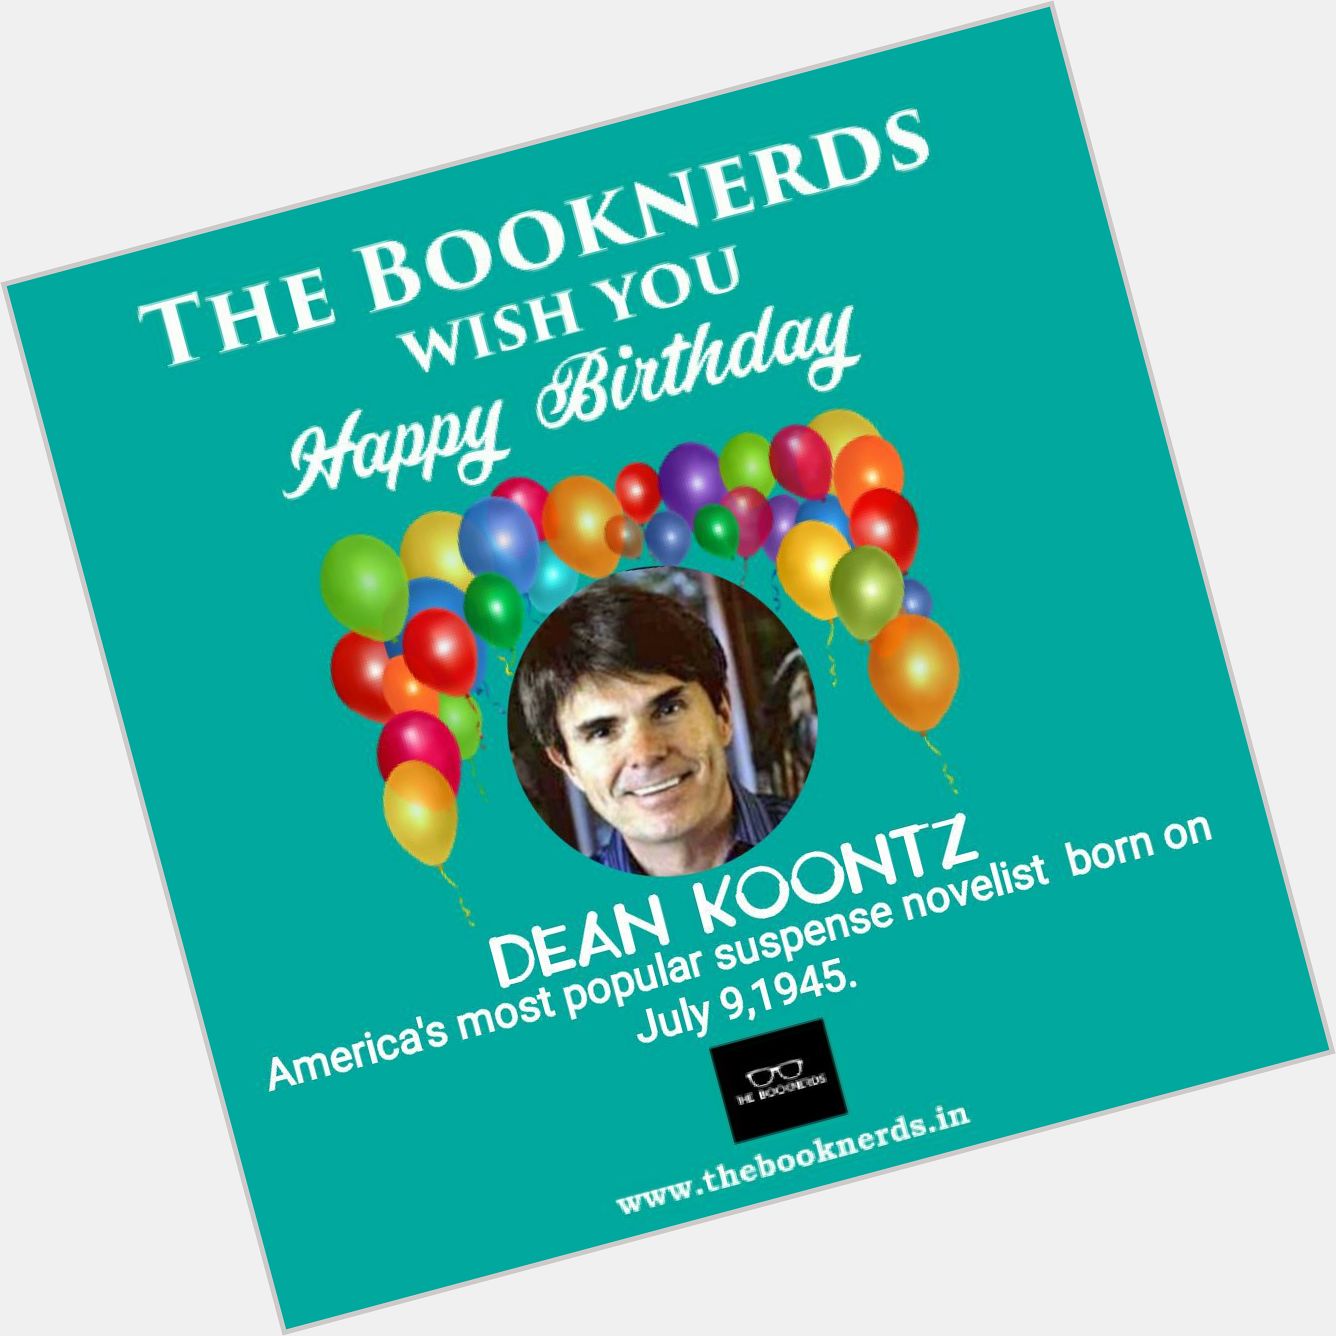 The Booknerds wishes a very happy birthday to Dean Koontz.    